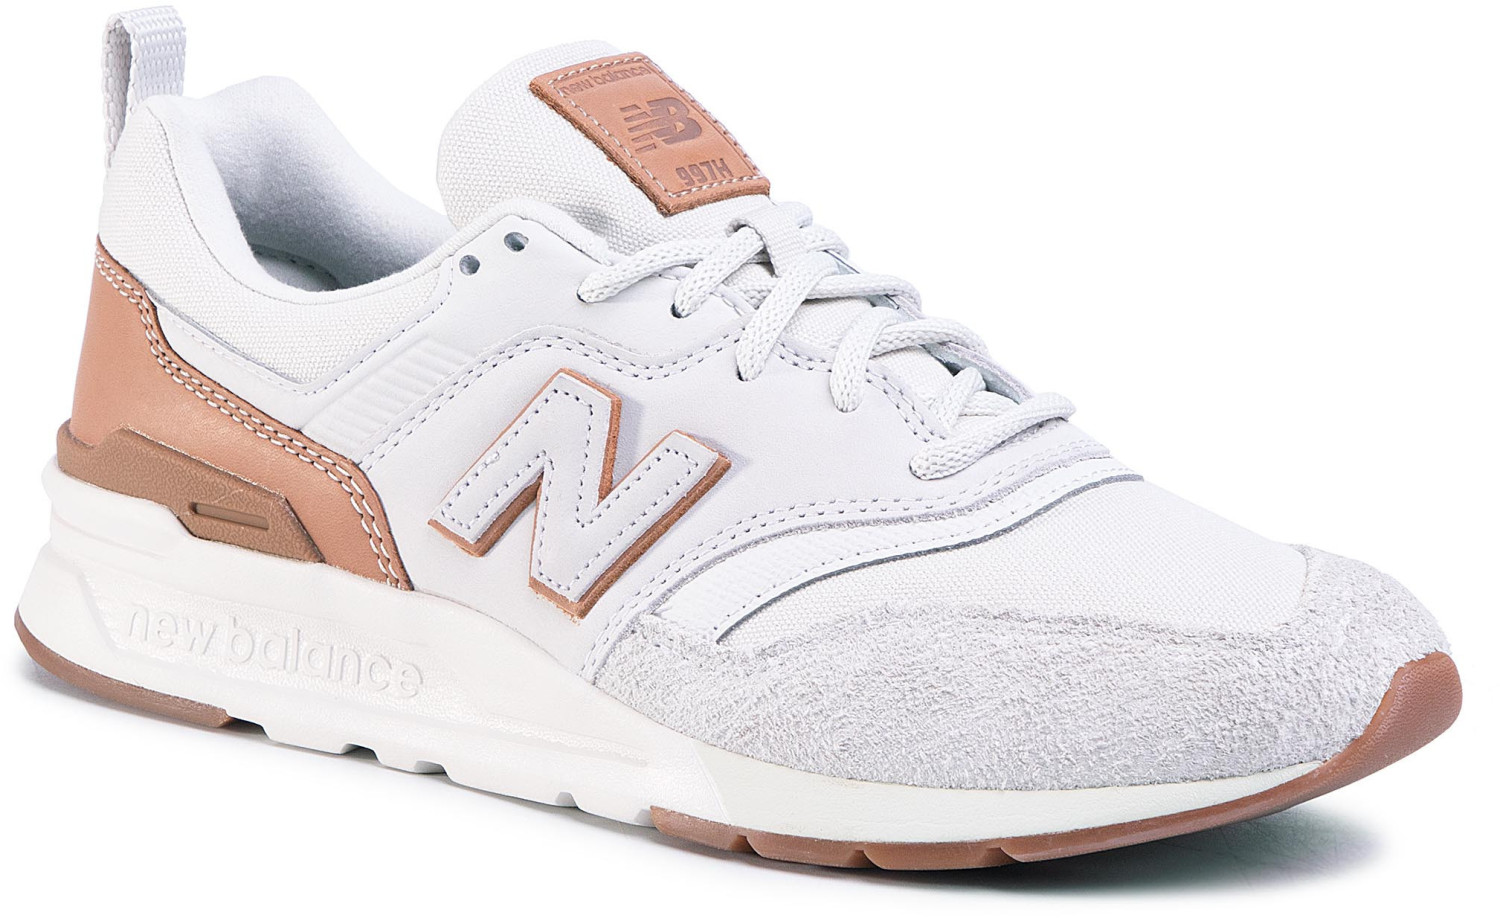 Buy New Balance CM997 beige from £49.95 (Today) – Best Deals on idealo ...